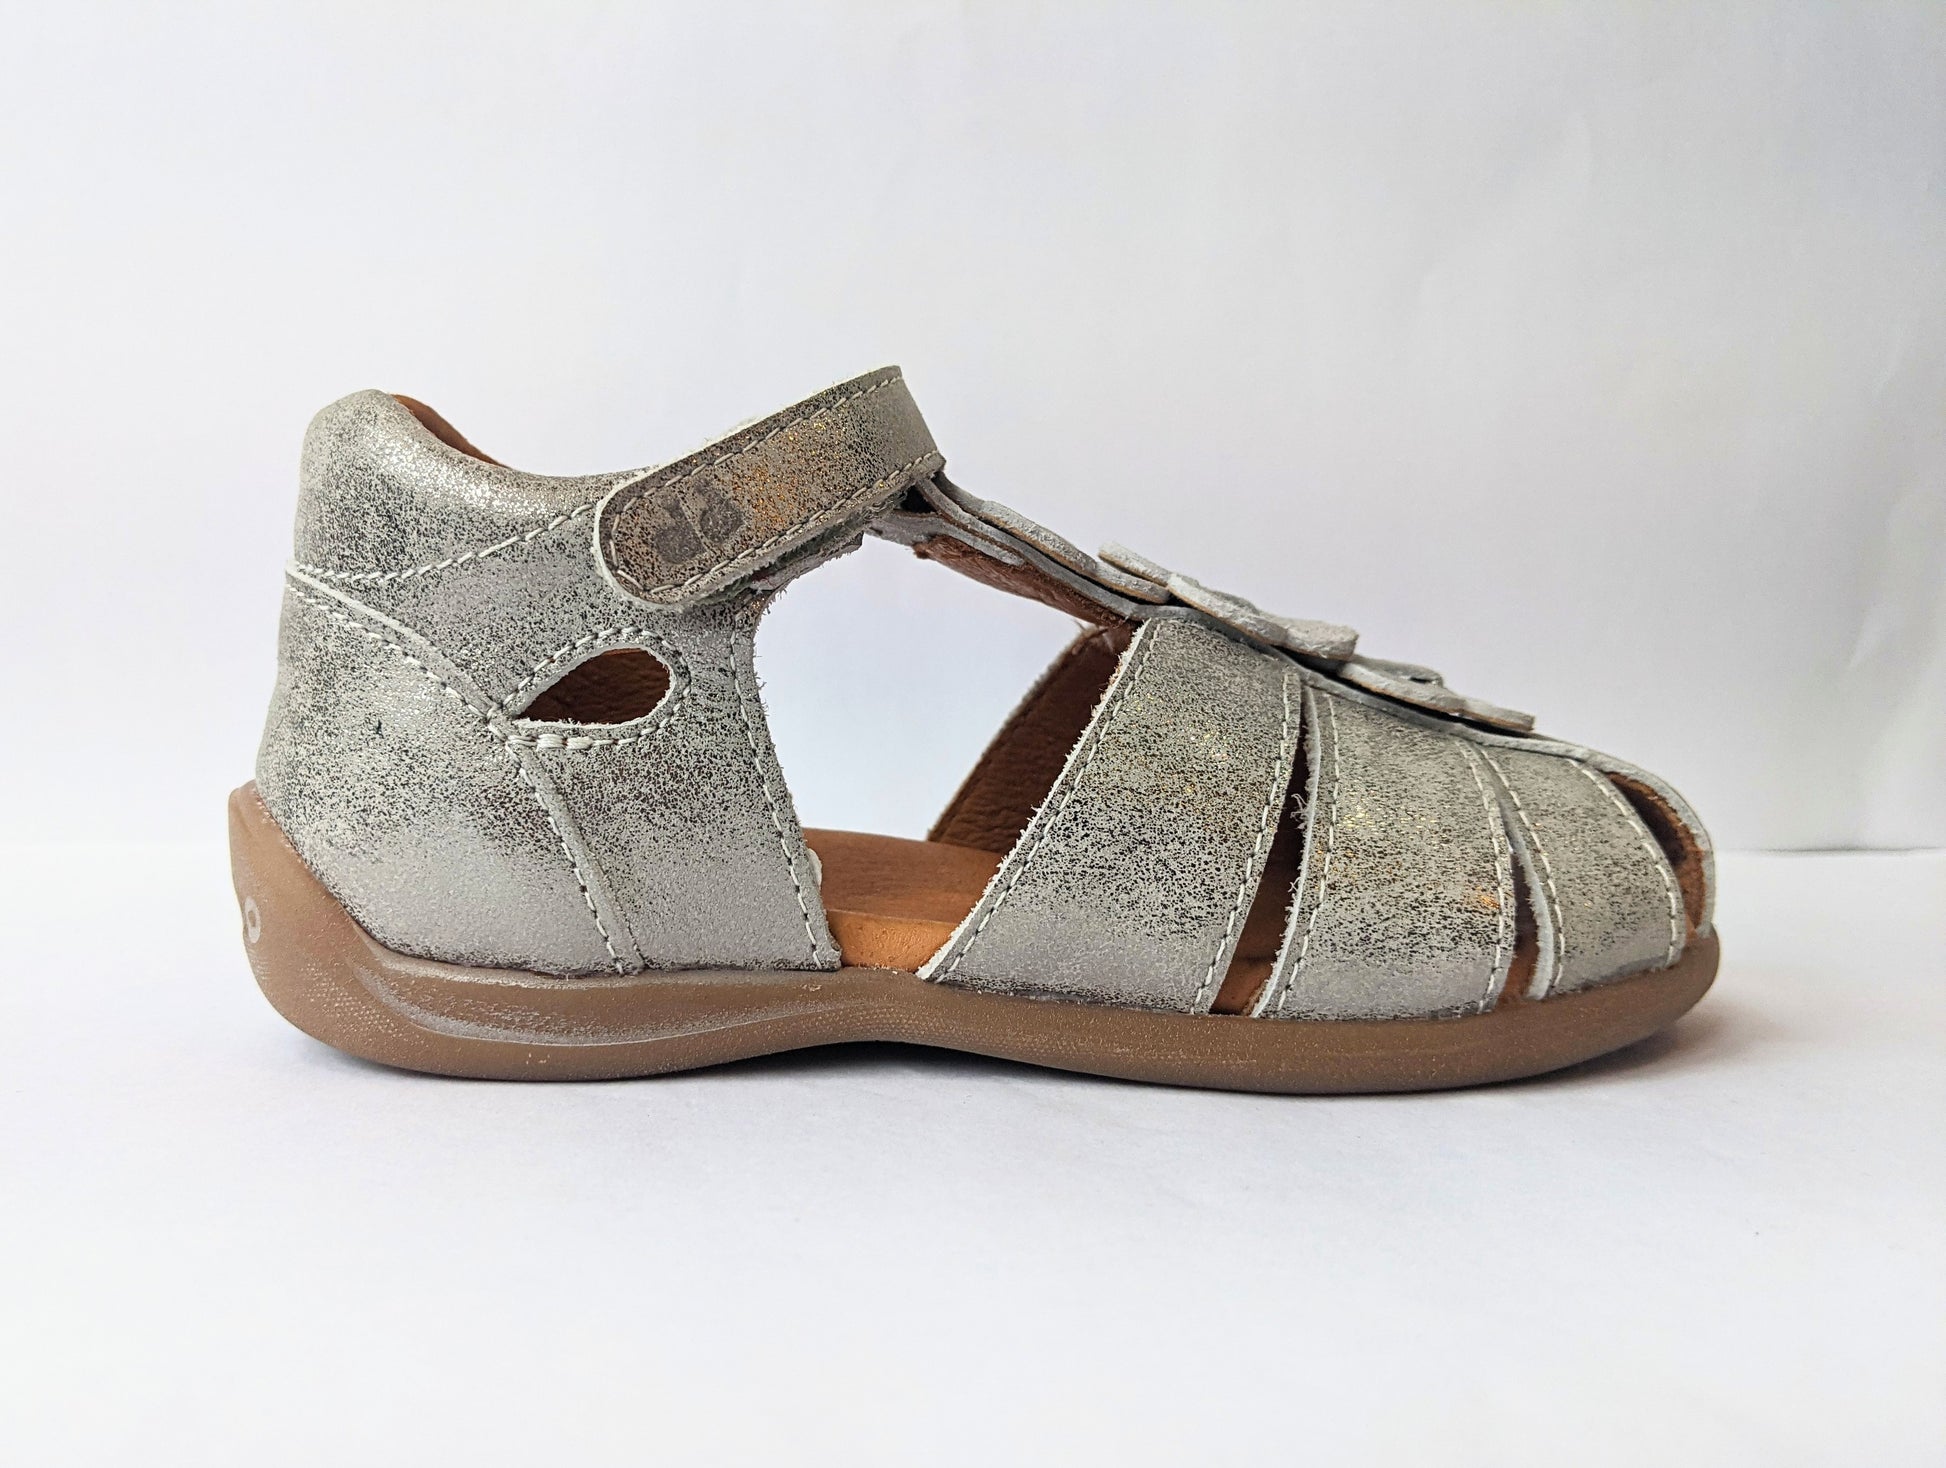 A girls closed toe sandal by Froddo, style G2150094-5, in silver with velcro fastening. Right side view. 